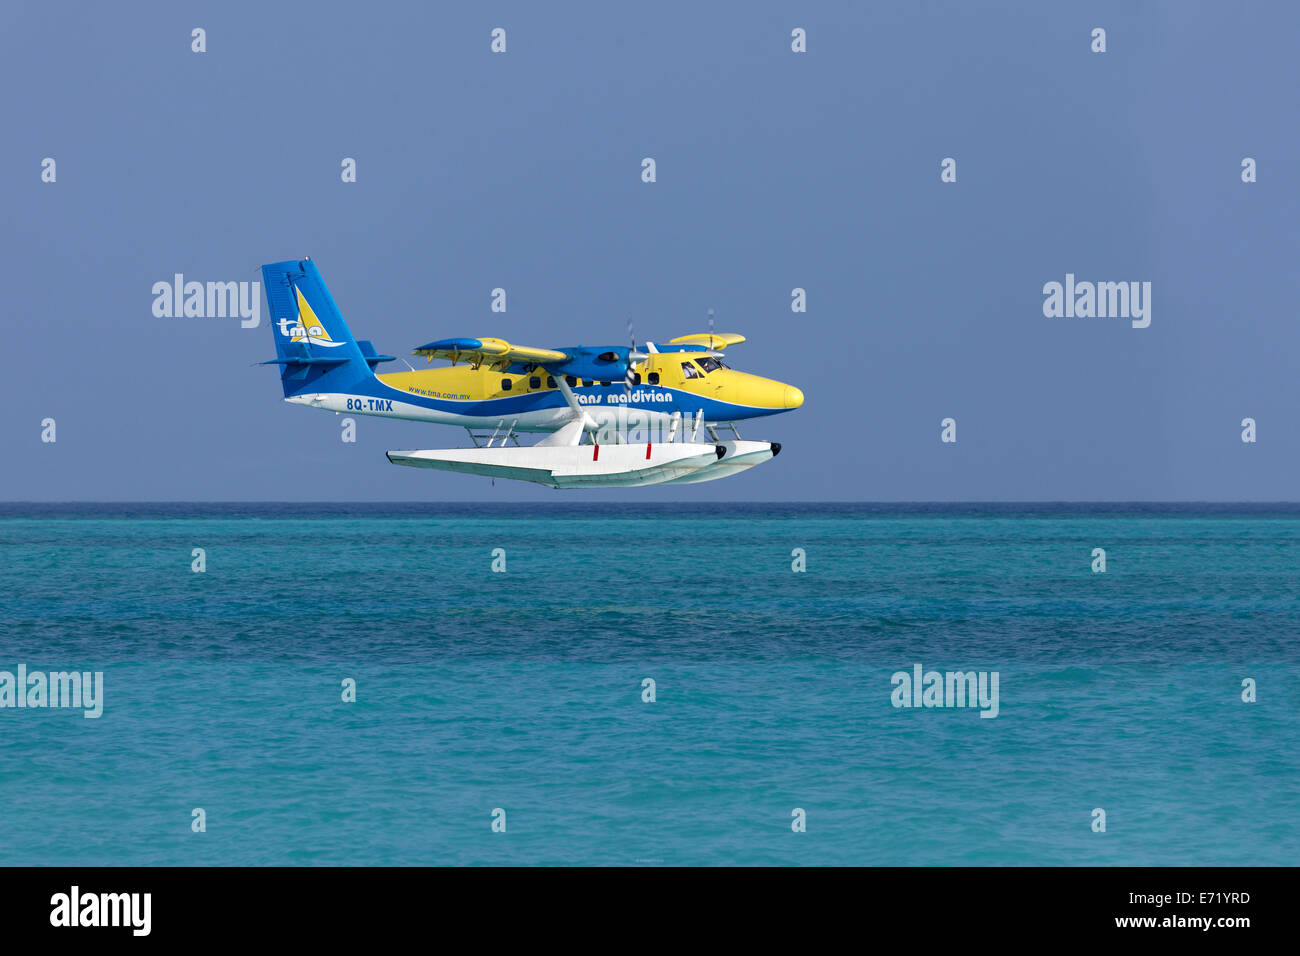 Hydroplane of Trans Maldivian Airways, De Havilland Canada DHC 6-400 Twin Otter, during the landing approach, Maldives Stock Photo